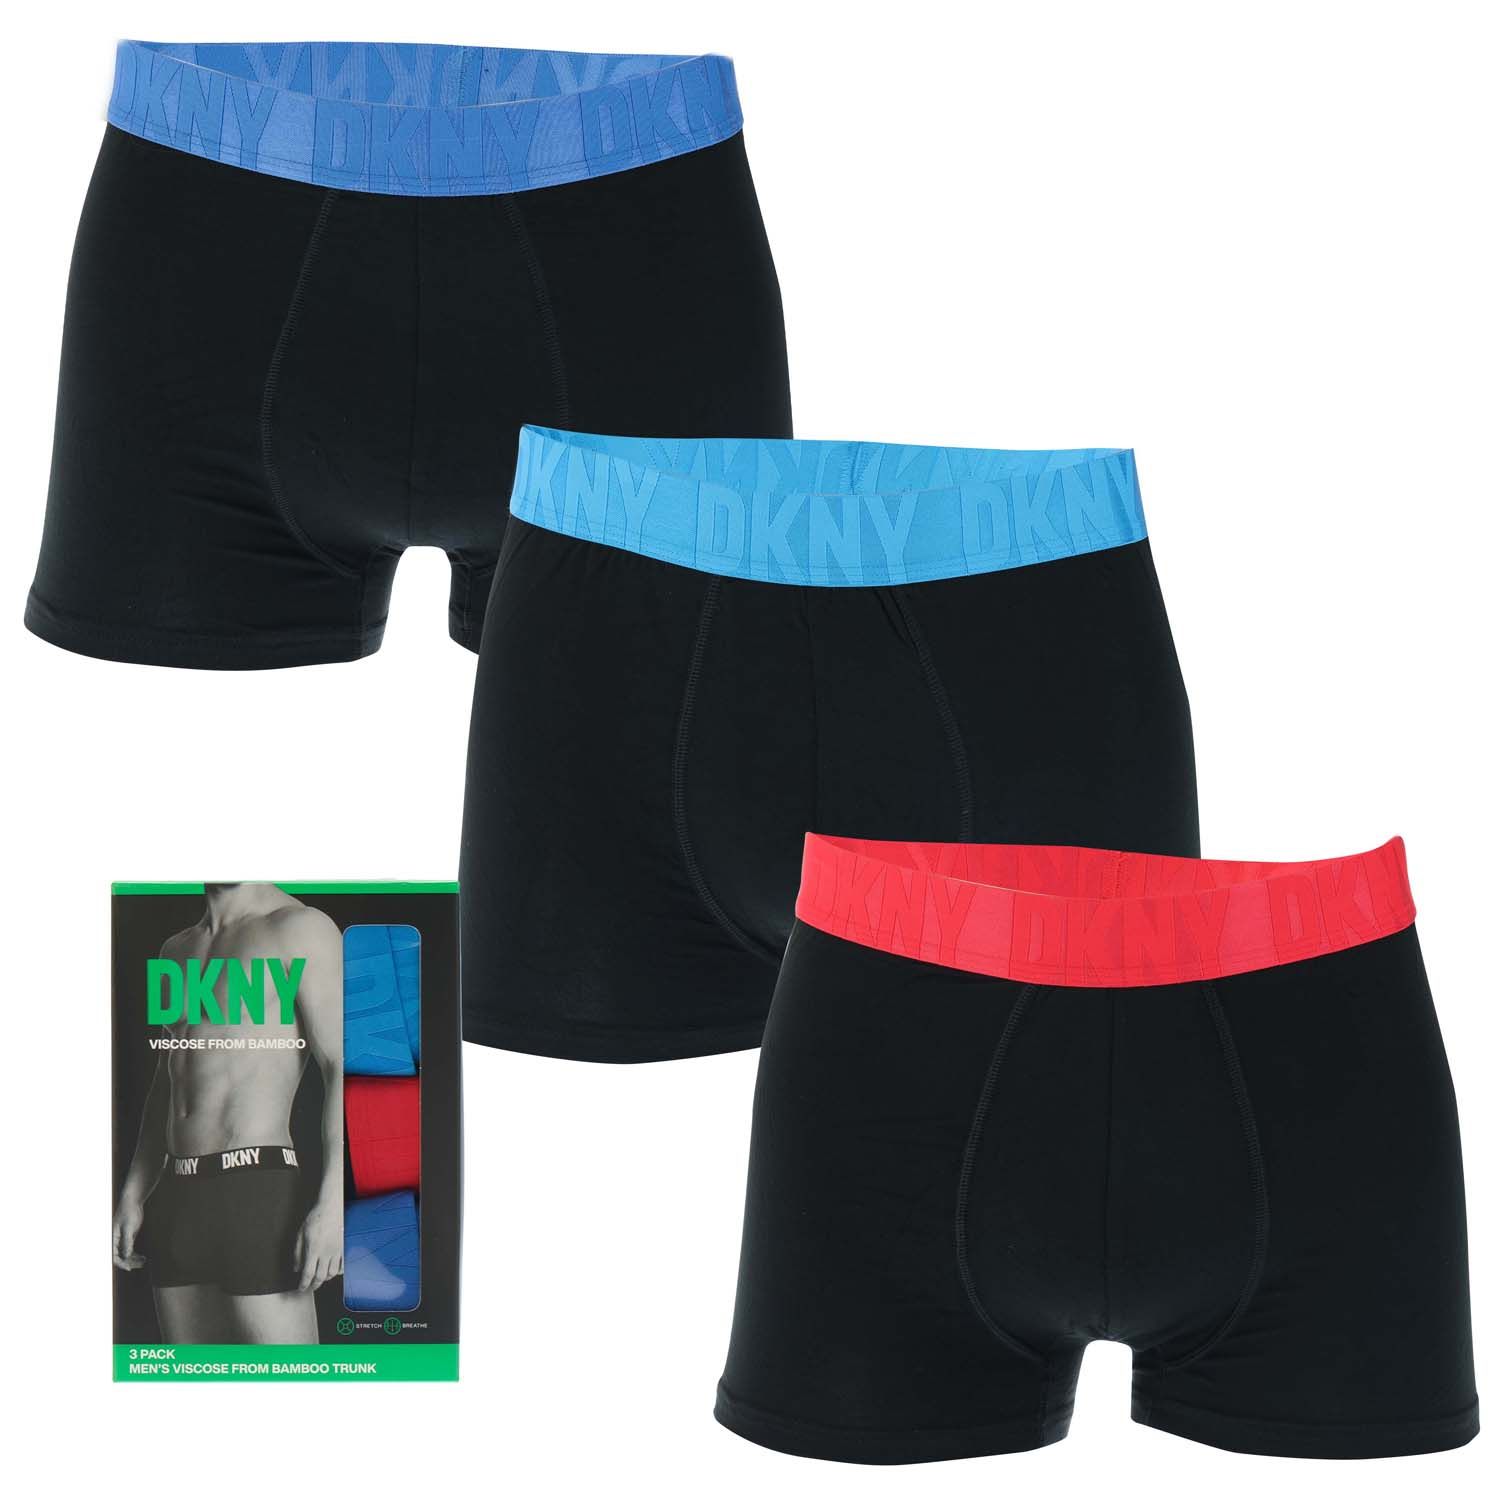 Mens 3 Pack Route Trunk Boxer Shorts